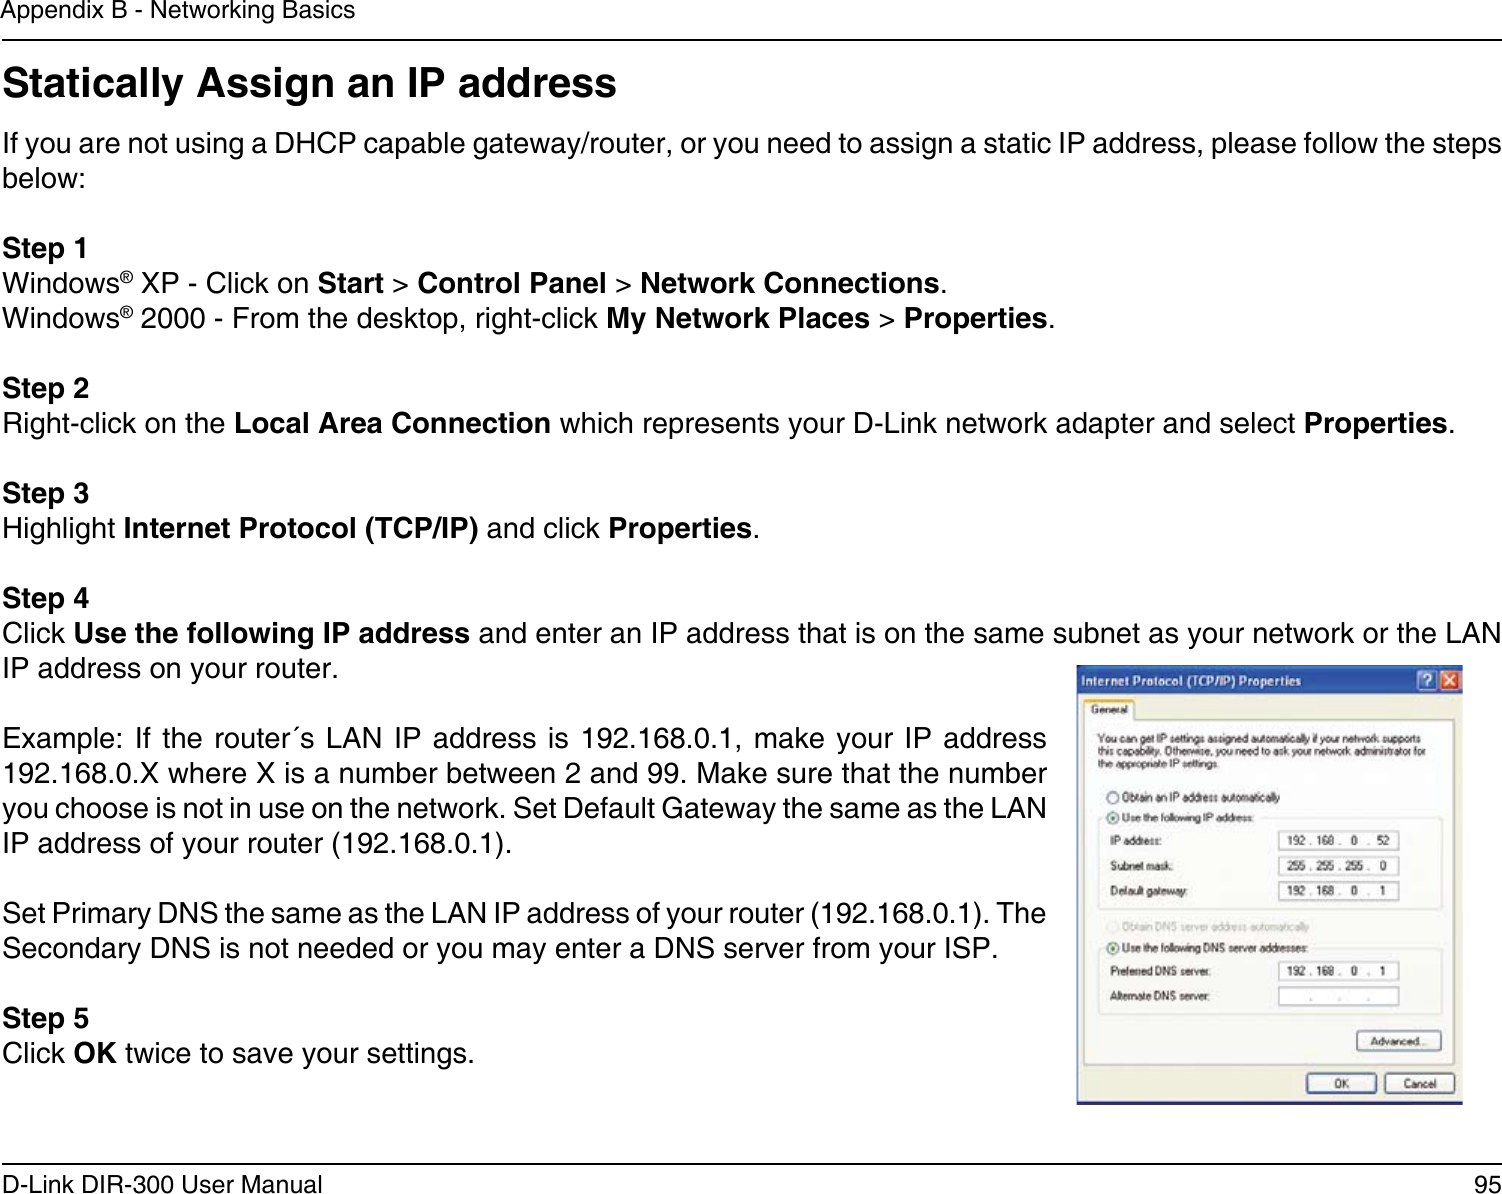 95D-Link DIR-300 User ManualAppendix B - Networking BasicsStatically Assign an IP addressIf you are not using a DHCP capable gateway/router, or you need to assign a static IP address, please follow the steps below:Step 1Windows® XP - Click on Start &gt; Control Panel &gt; Network Connections.Windows® 2000 - From the desktop, right-click My Network Places &gt; Properties.Step 2Right-click on the Local Area Connection which represents your D-Link network adapter and select Properties.Step 3Highlight Internet Protocol (TCP/IP) and click Properties.Step 4Click Use the following IP address and enter an IP address that is on the same subnet as your network or the LAN IP address on your router. Example: If  the router´s LAN IP address  is 192.168.0.1, make your IP  address 192.168.0.X where X is a number between 2 and 99. Make sure that the number you choose is not in use on the network. Set Default Gateway the same as the LAN IP address of your router (192.168.0.1). Set Primary DNS the same as the LAN IP address of your router (192.168.0.1). The Secondary DNS is not needed or you may enter a DNS server from your ISP.Step 5Click OK twice to save your settings.